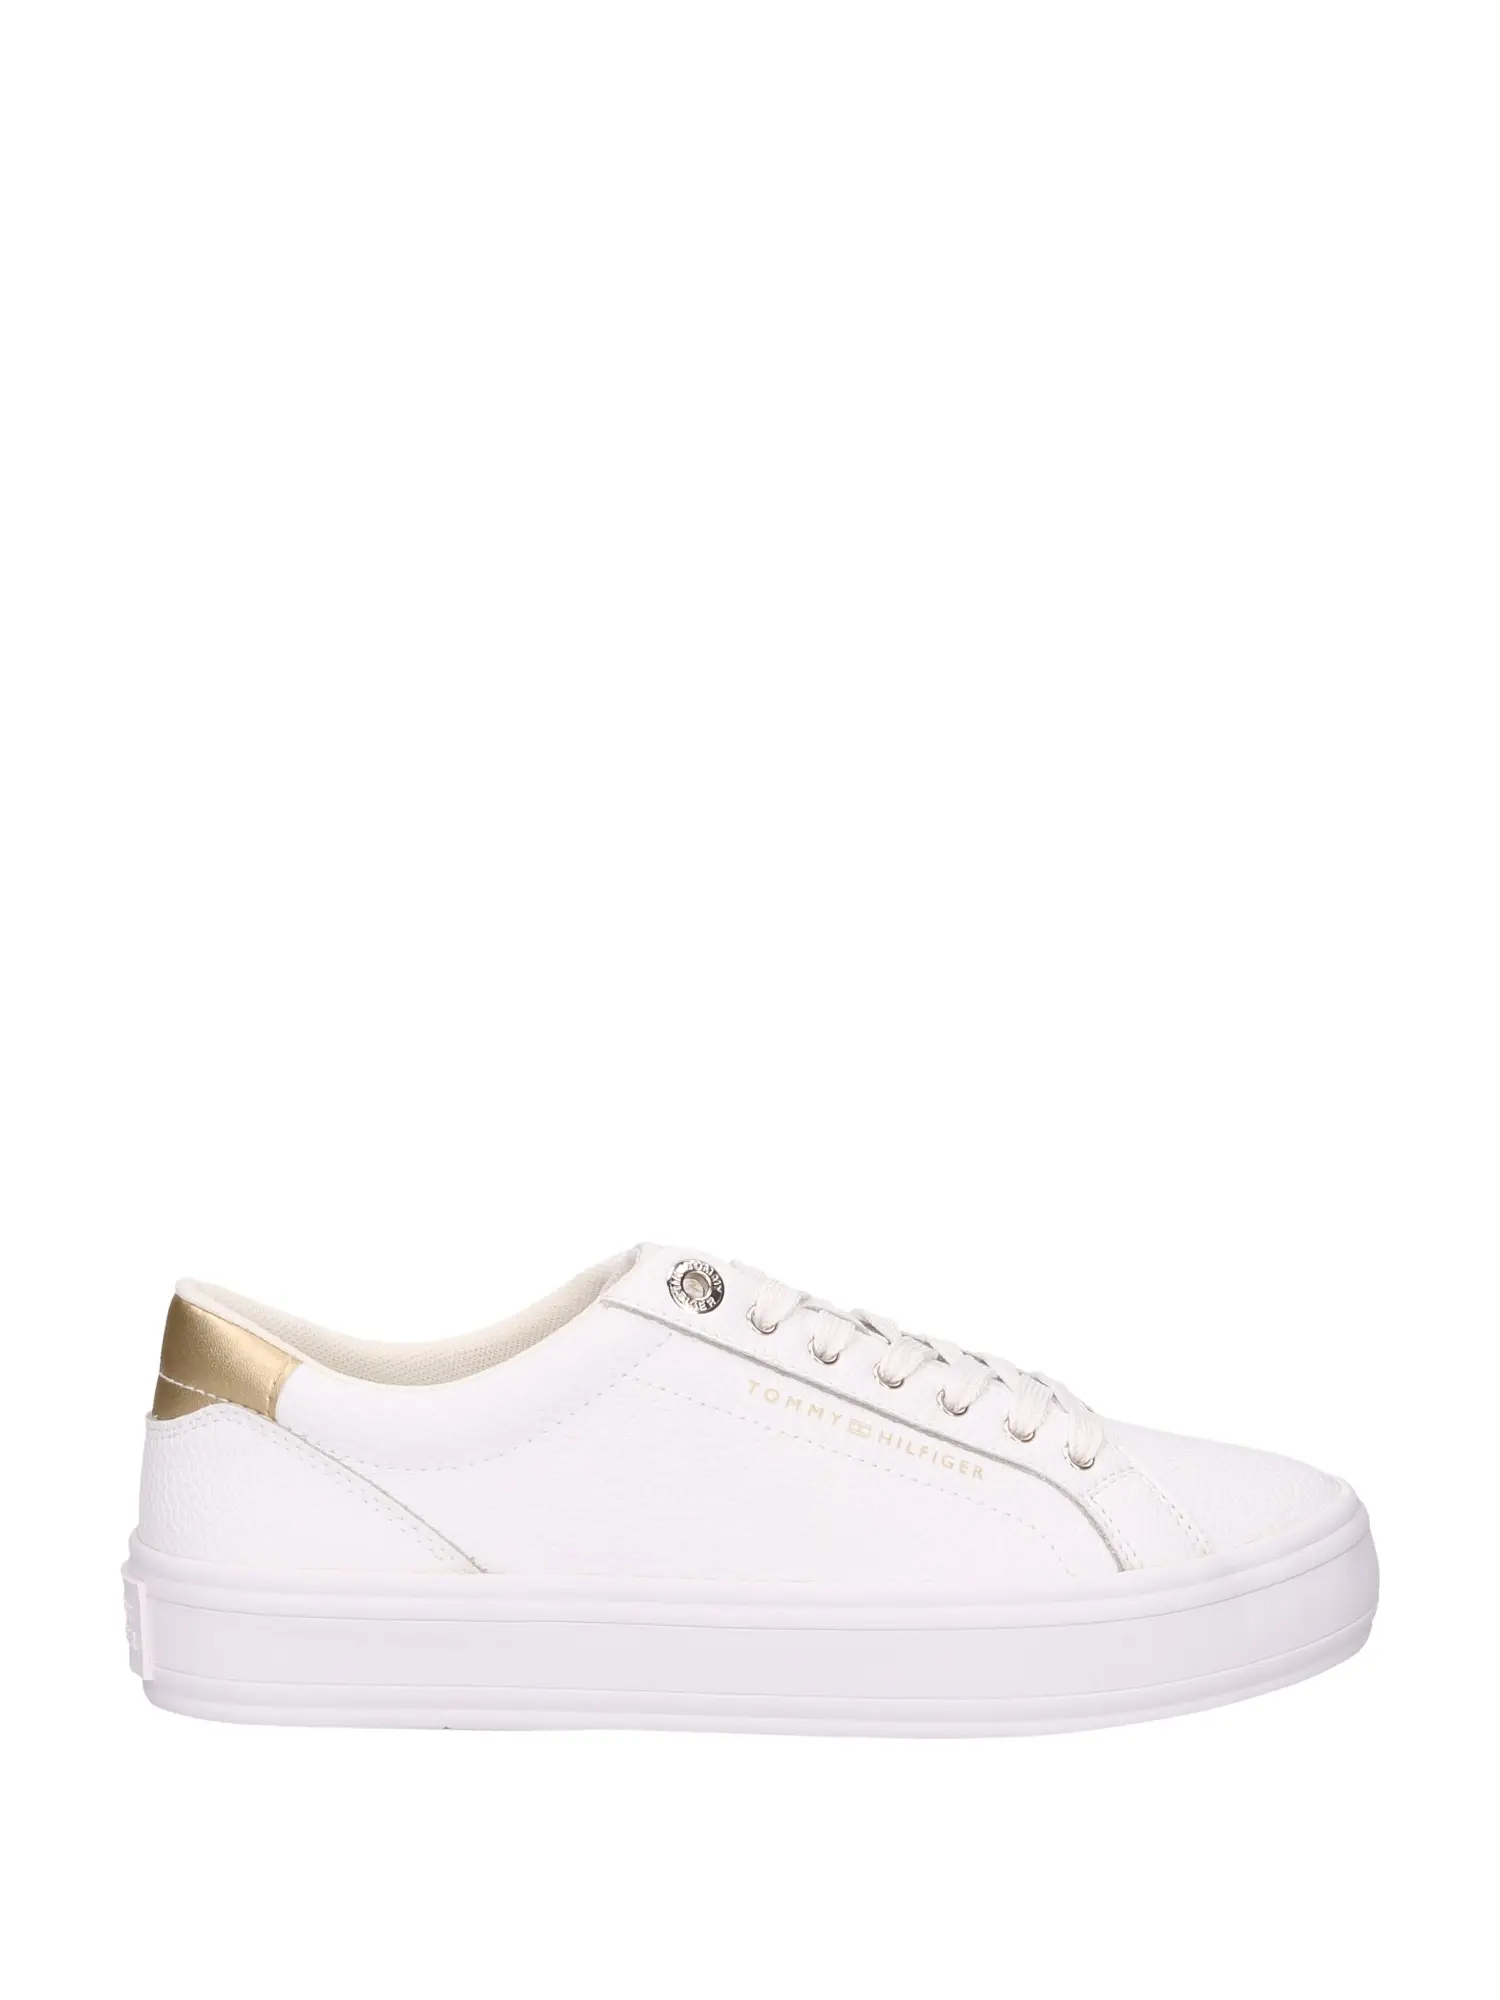 SNEAKERS DONNA - TOMMY HILFIGER - FW0FW07778 - BIANCO, 40